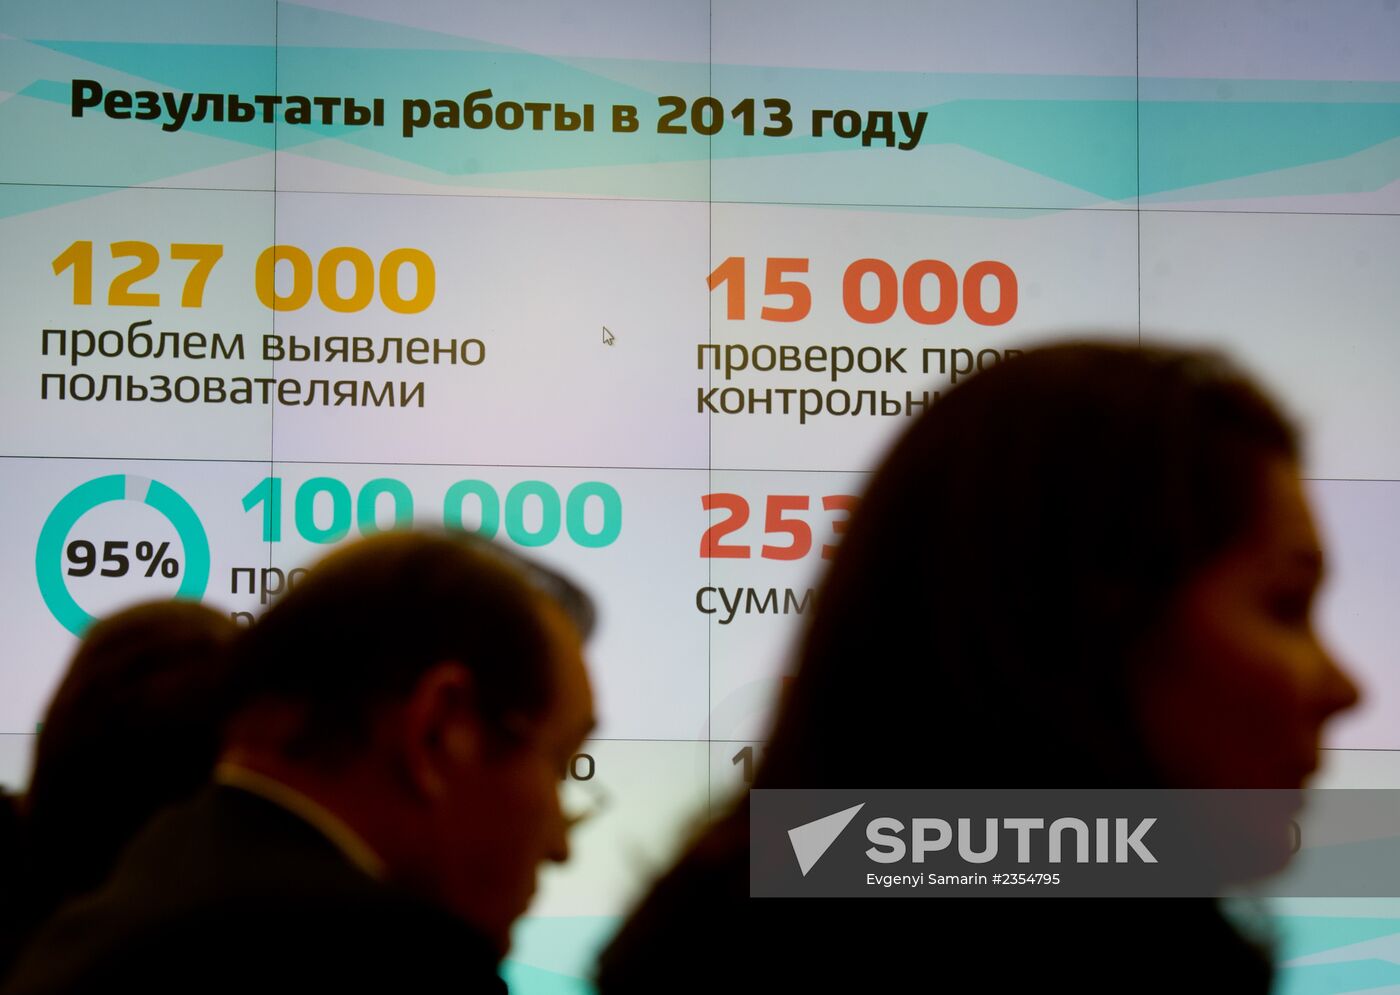 Sergei Sobyanin holds meeting on 2013 results of Our City website